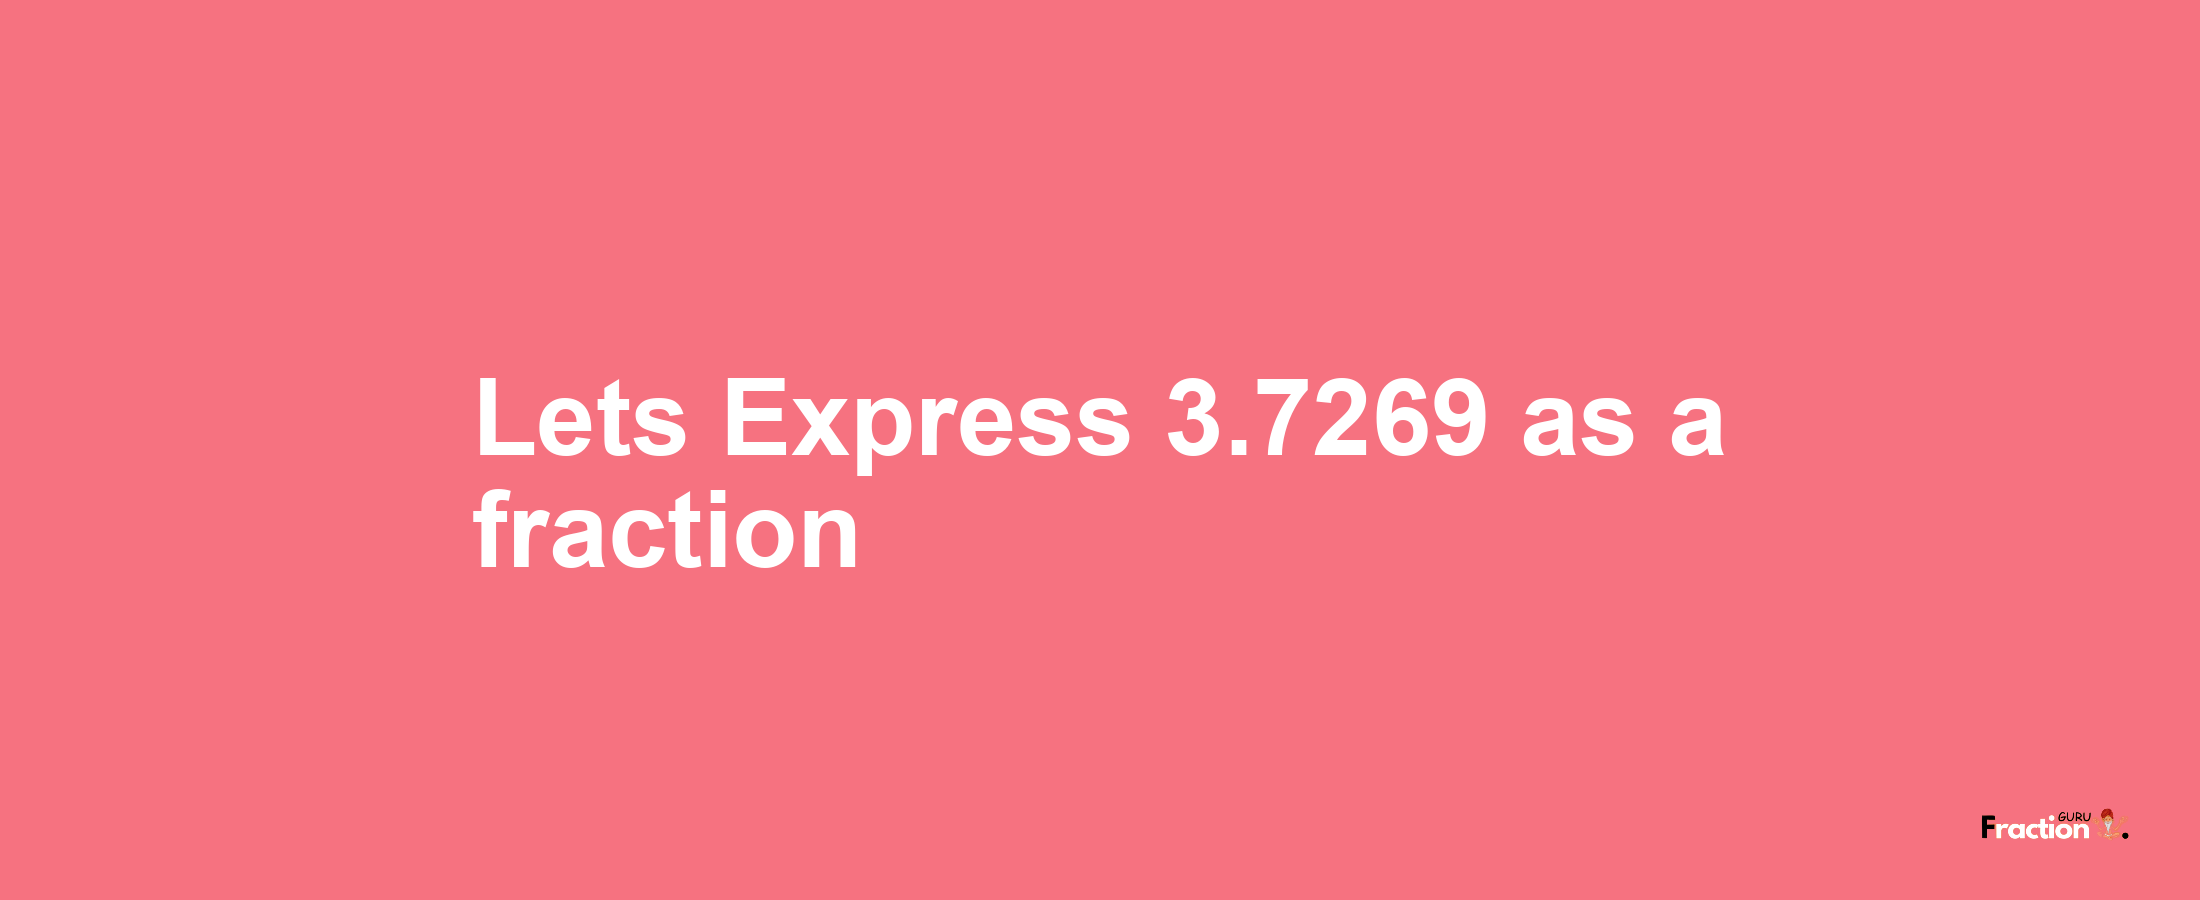 Lets Express 3.7269 as afraction